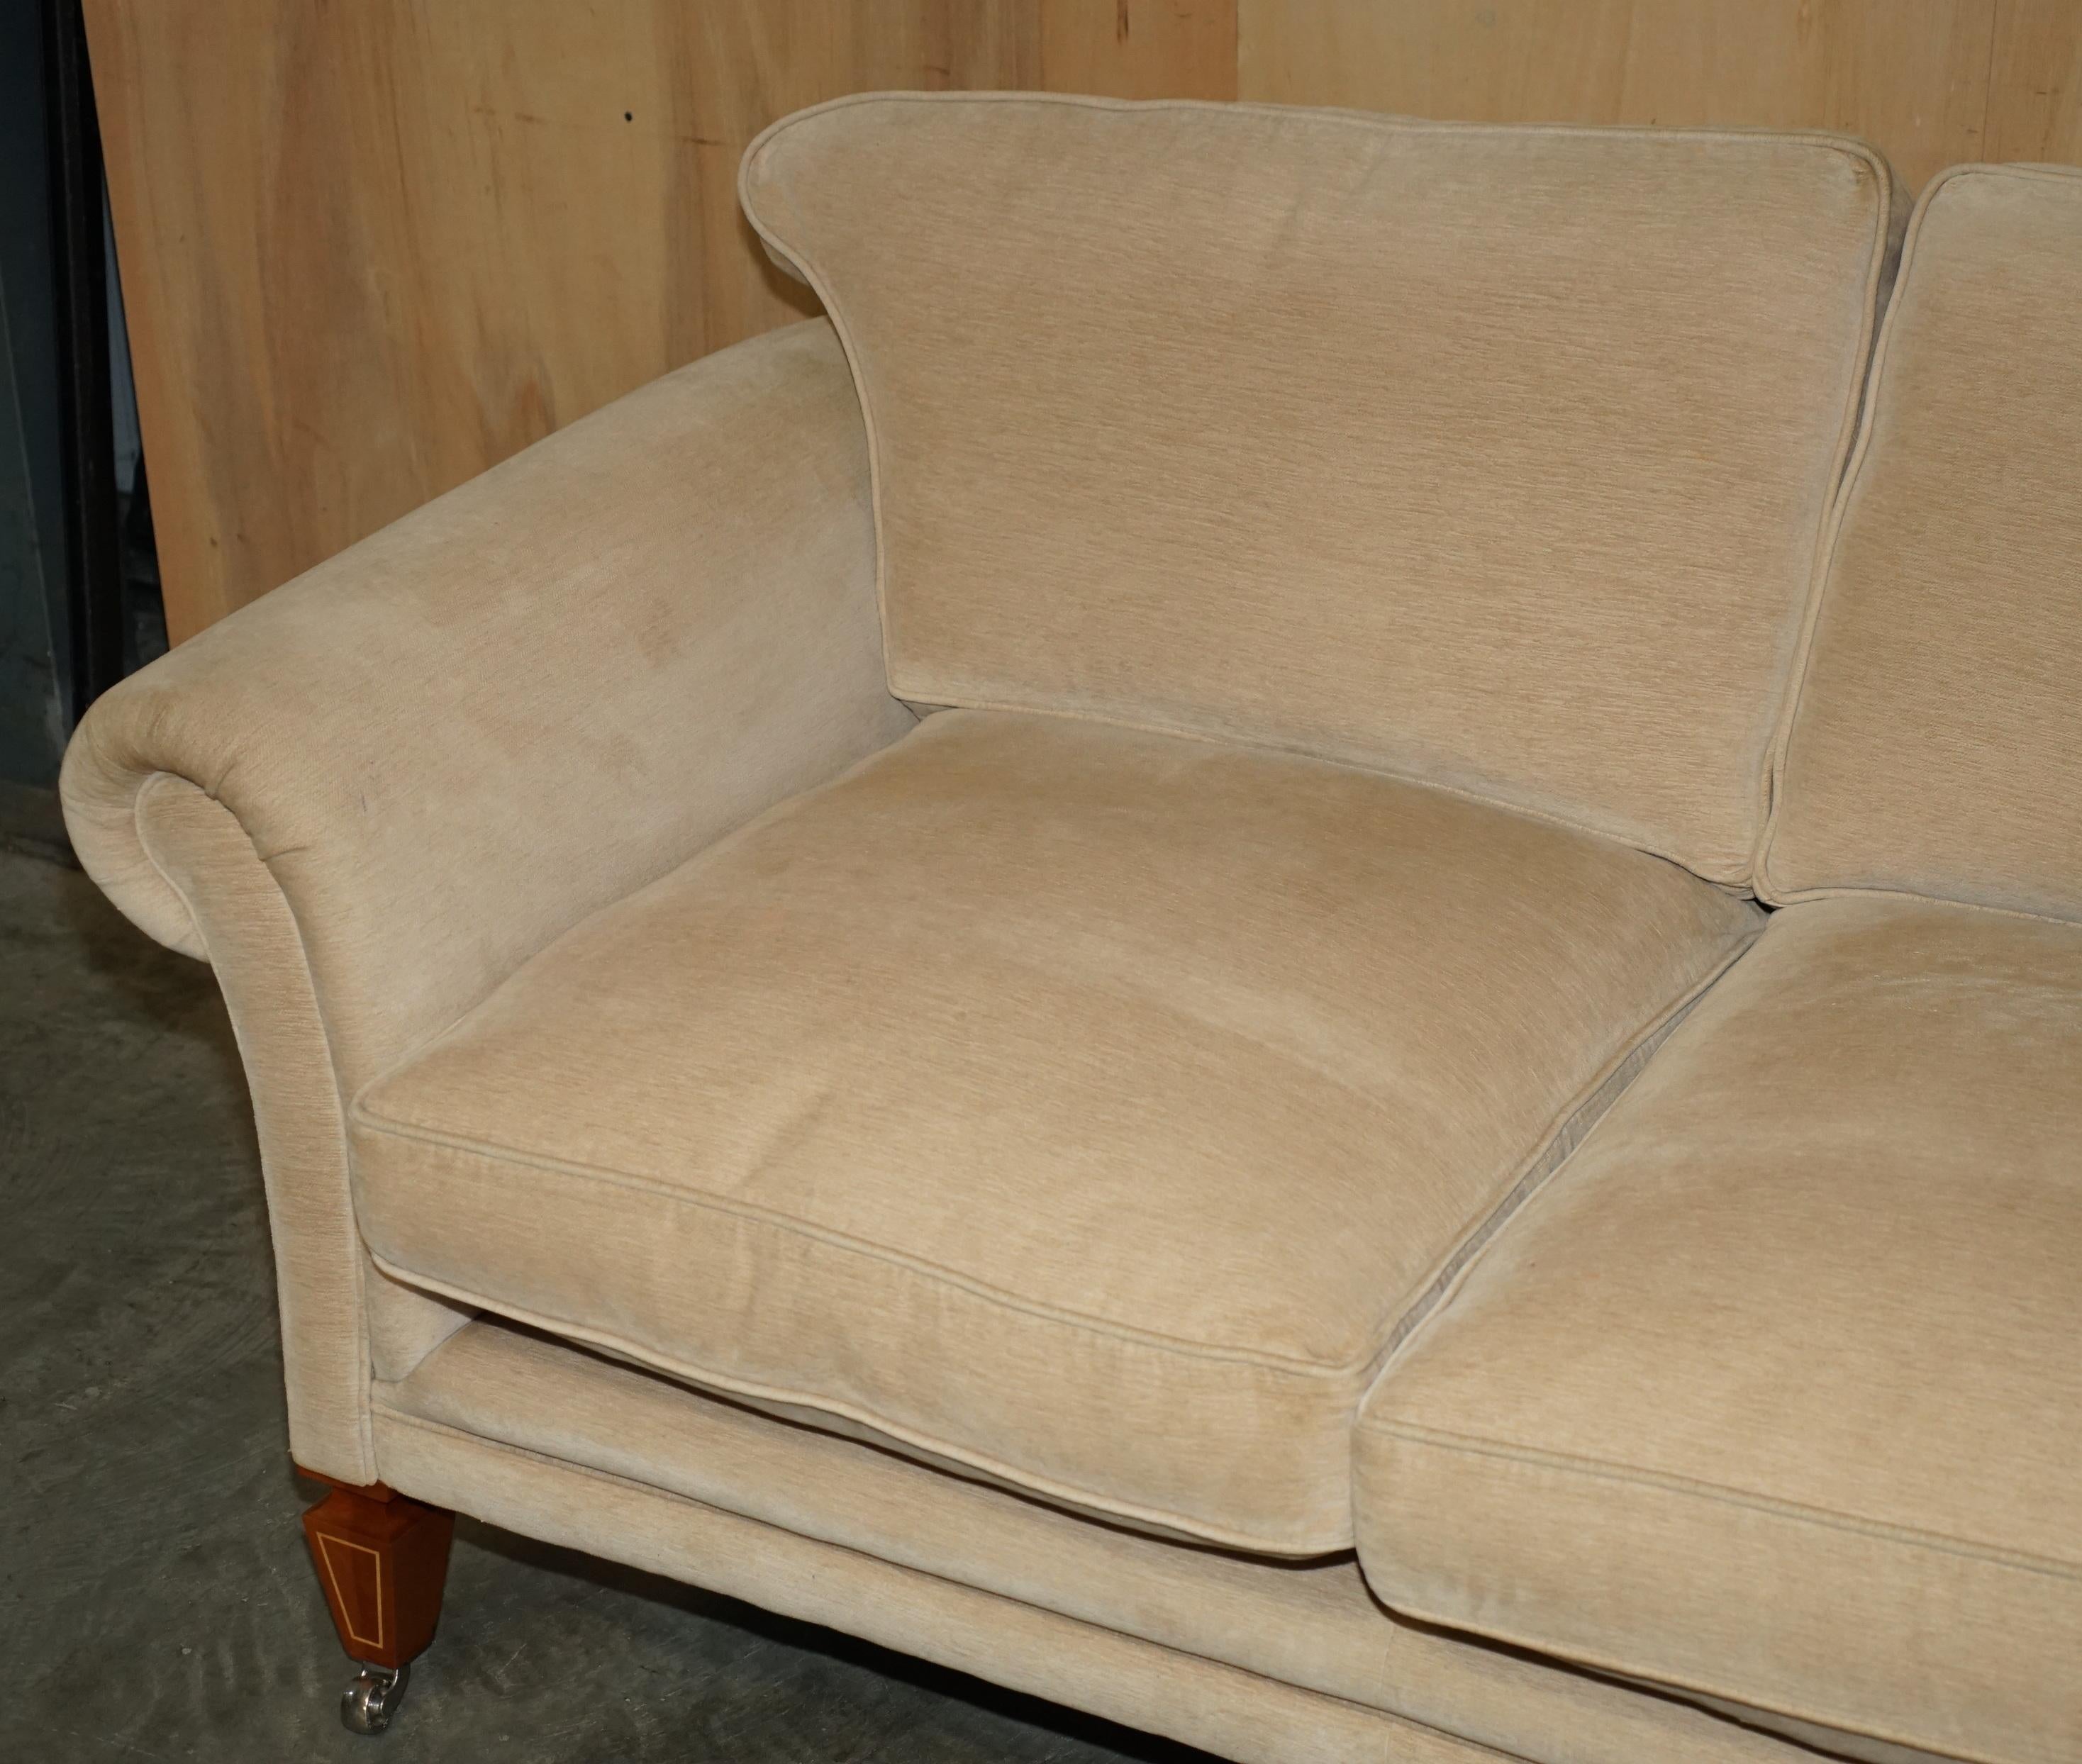 20th Century EXQUISITE VISCOUNT DAVID LINLEY TWO SEAT SOFA WiTH STAMPED CASTORS For Sale